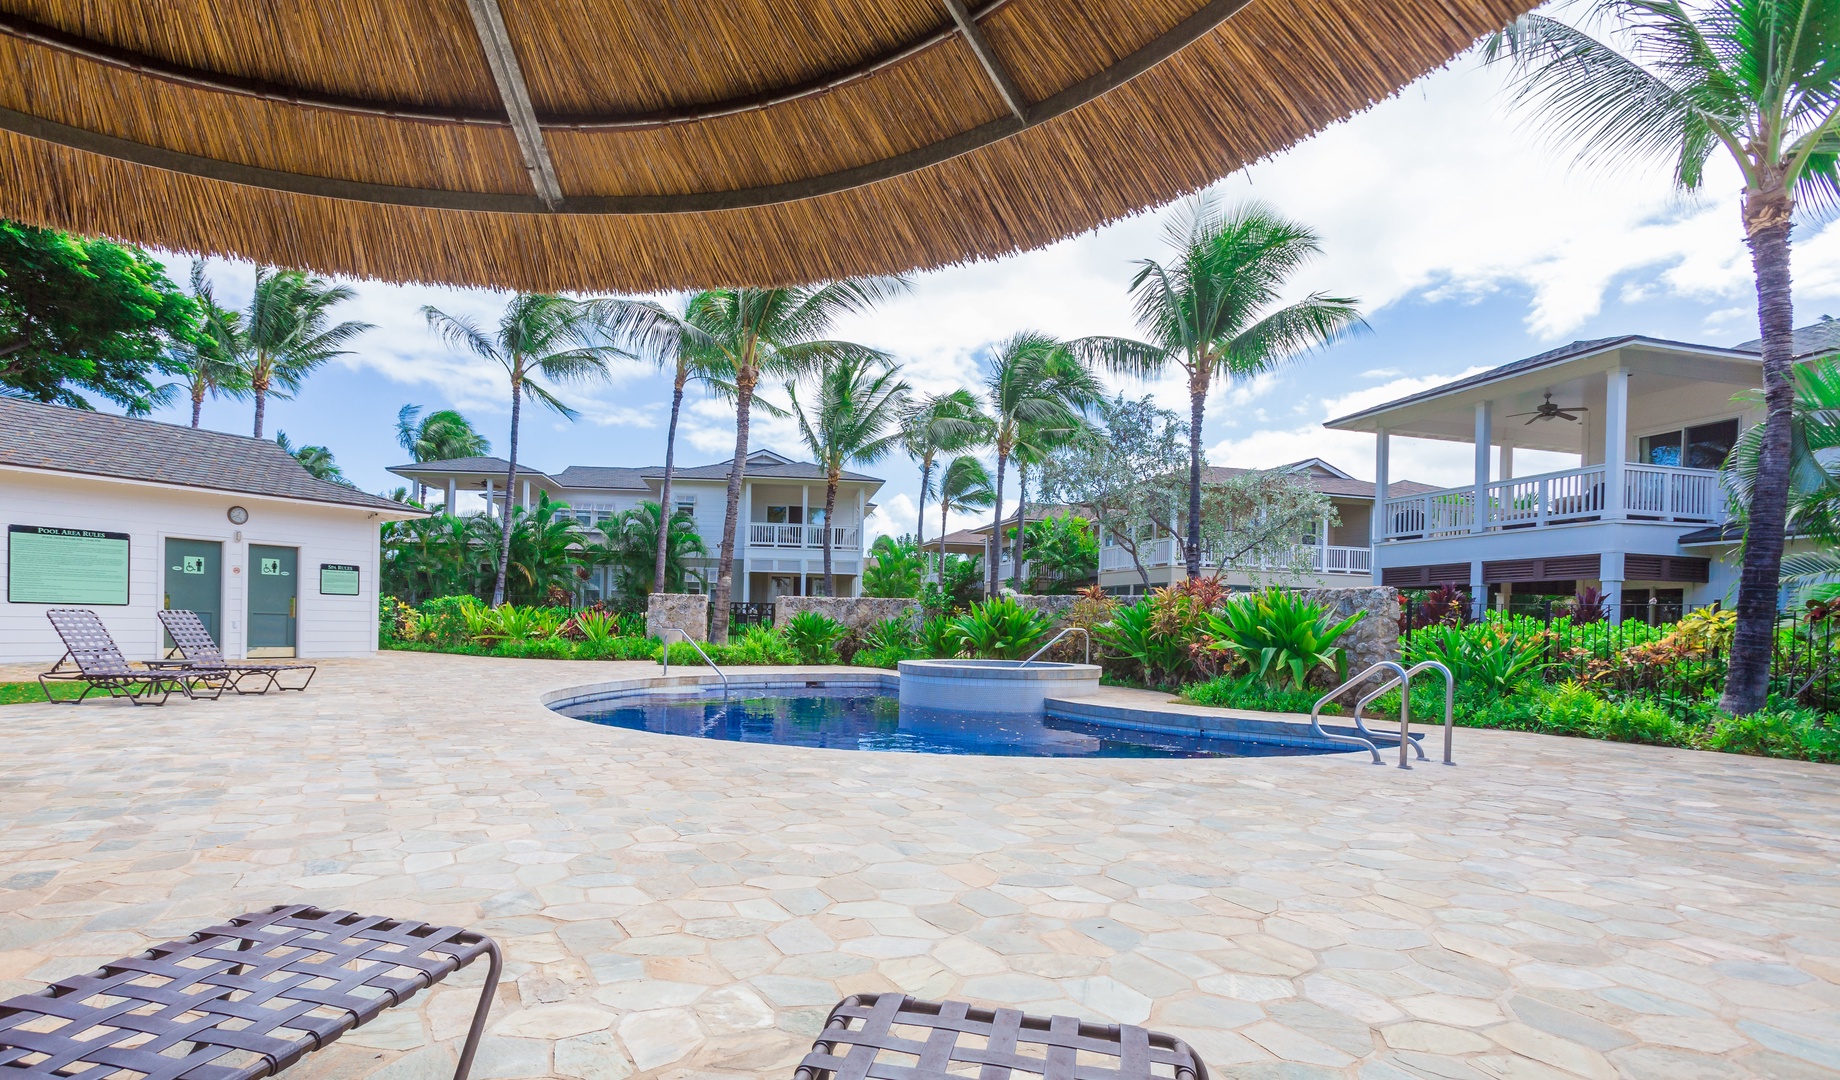 Kapolei Vacation Rentals, Coconut Plantation 1222-3 - Take a book and relax by the crystal blue waters of the community pool.